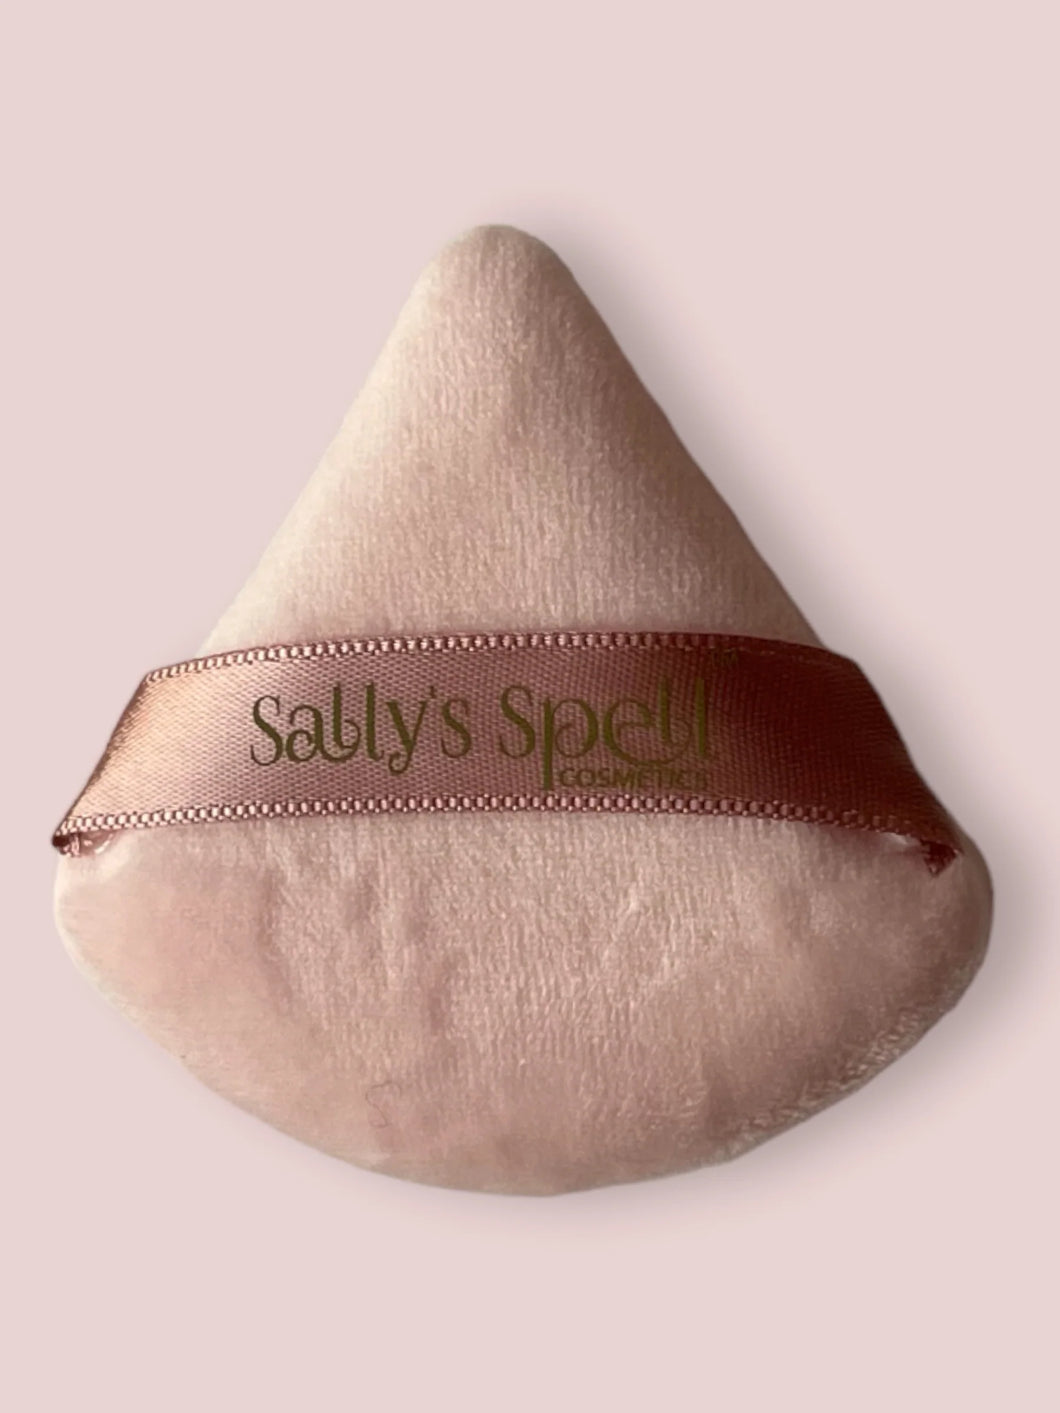 Sally's Spell - Triangle Puff